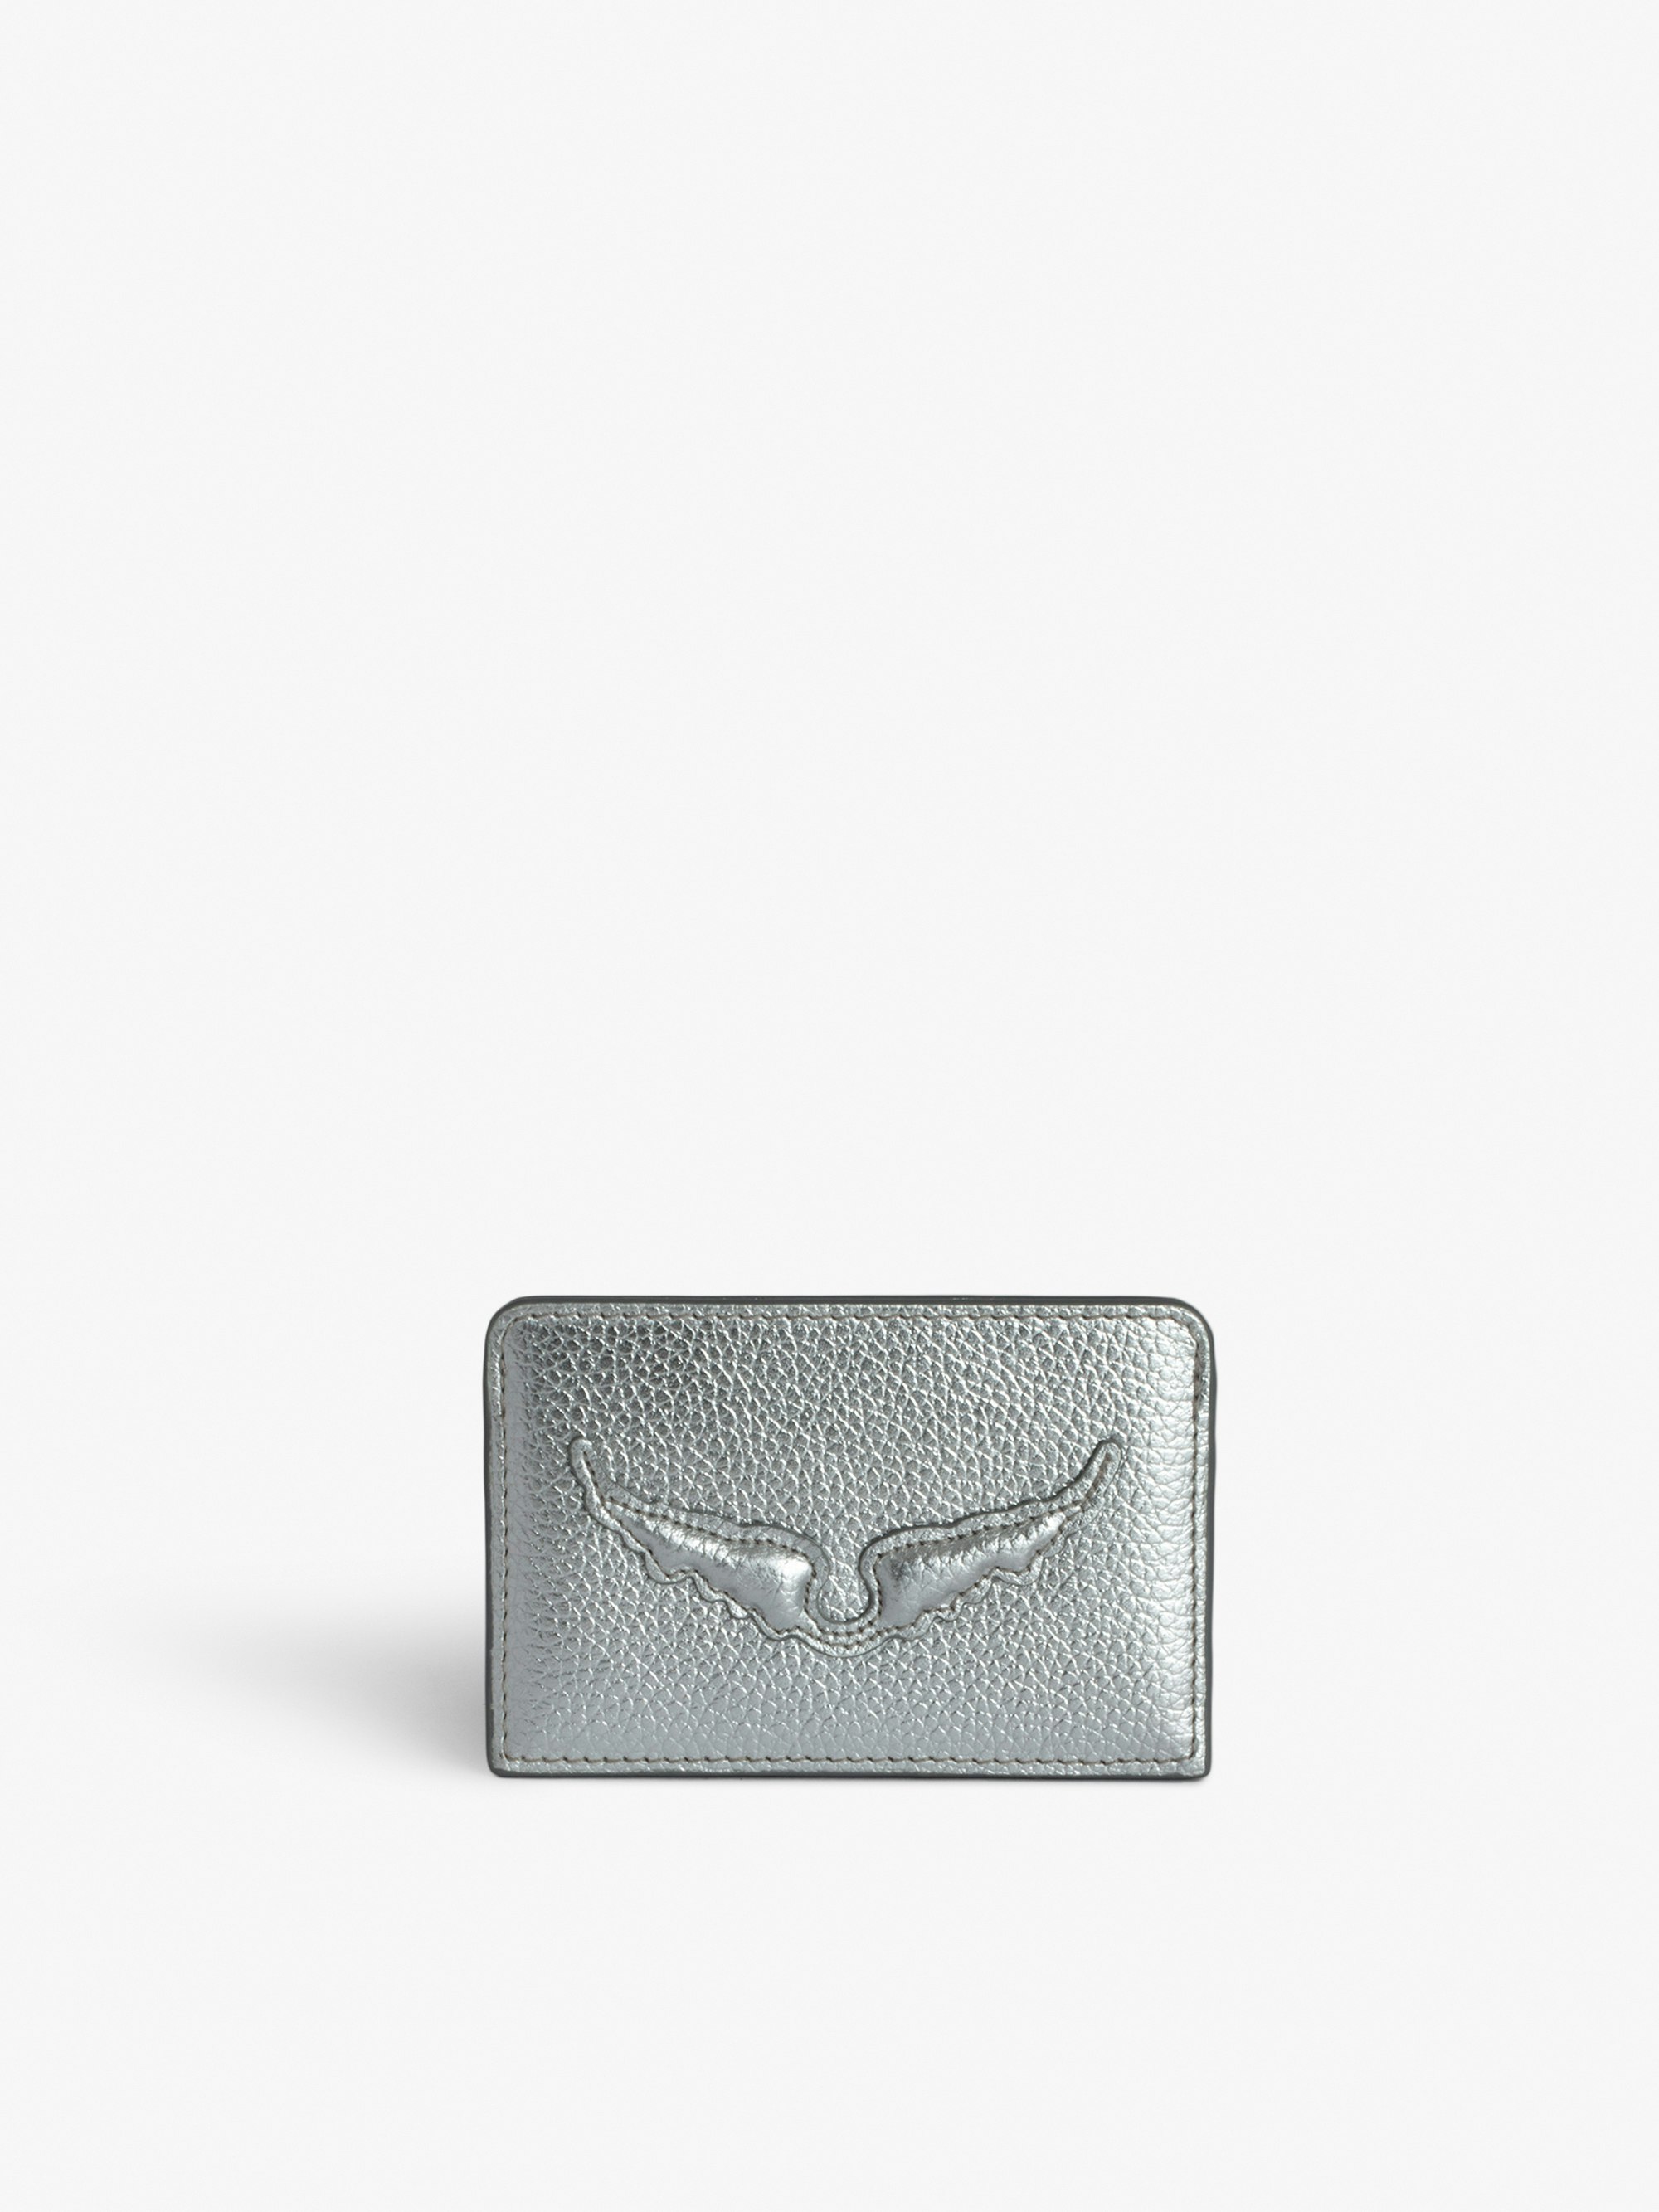 ZV Pass Card Holder - Silver-tone metallic grained leather card holder with embossed wings signature and debossed "We Should Kiss" message.